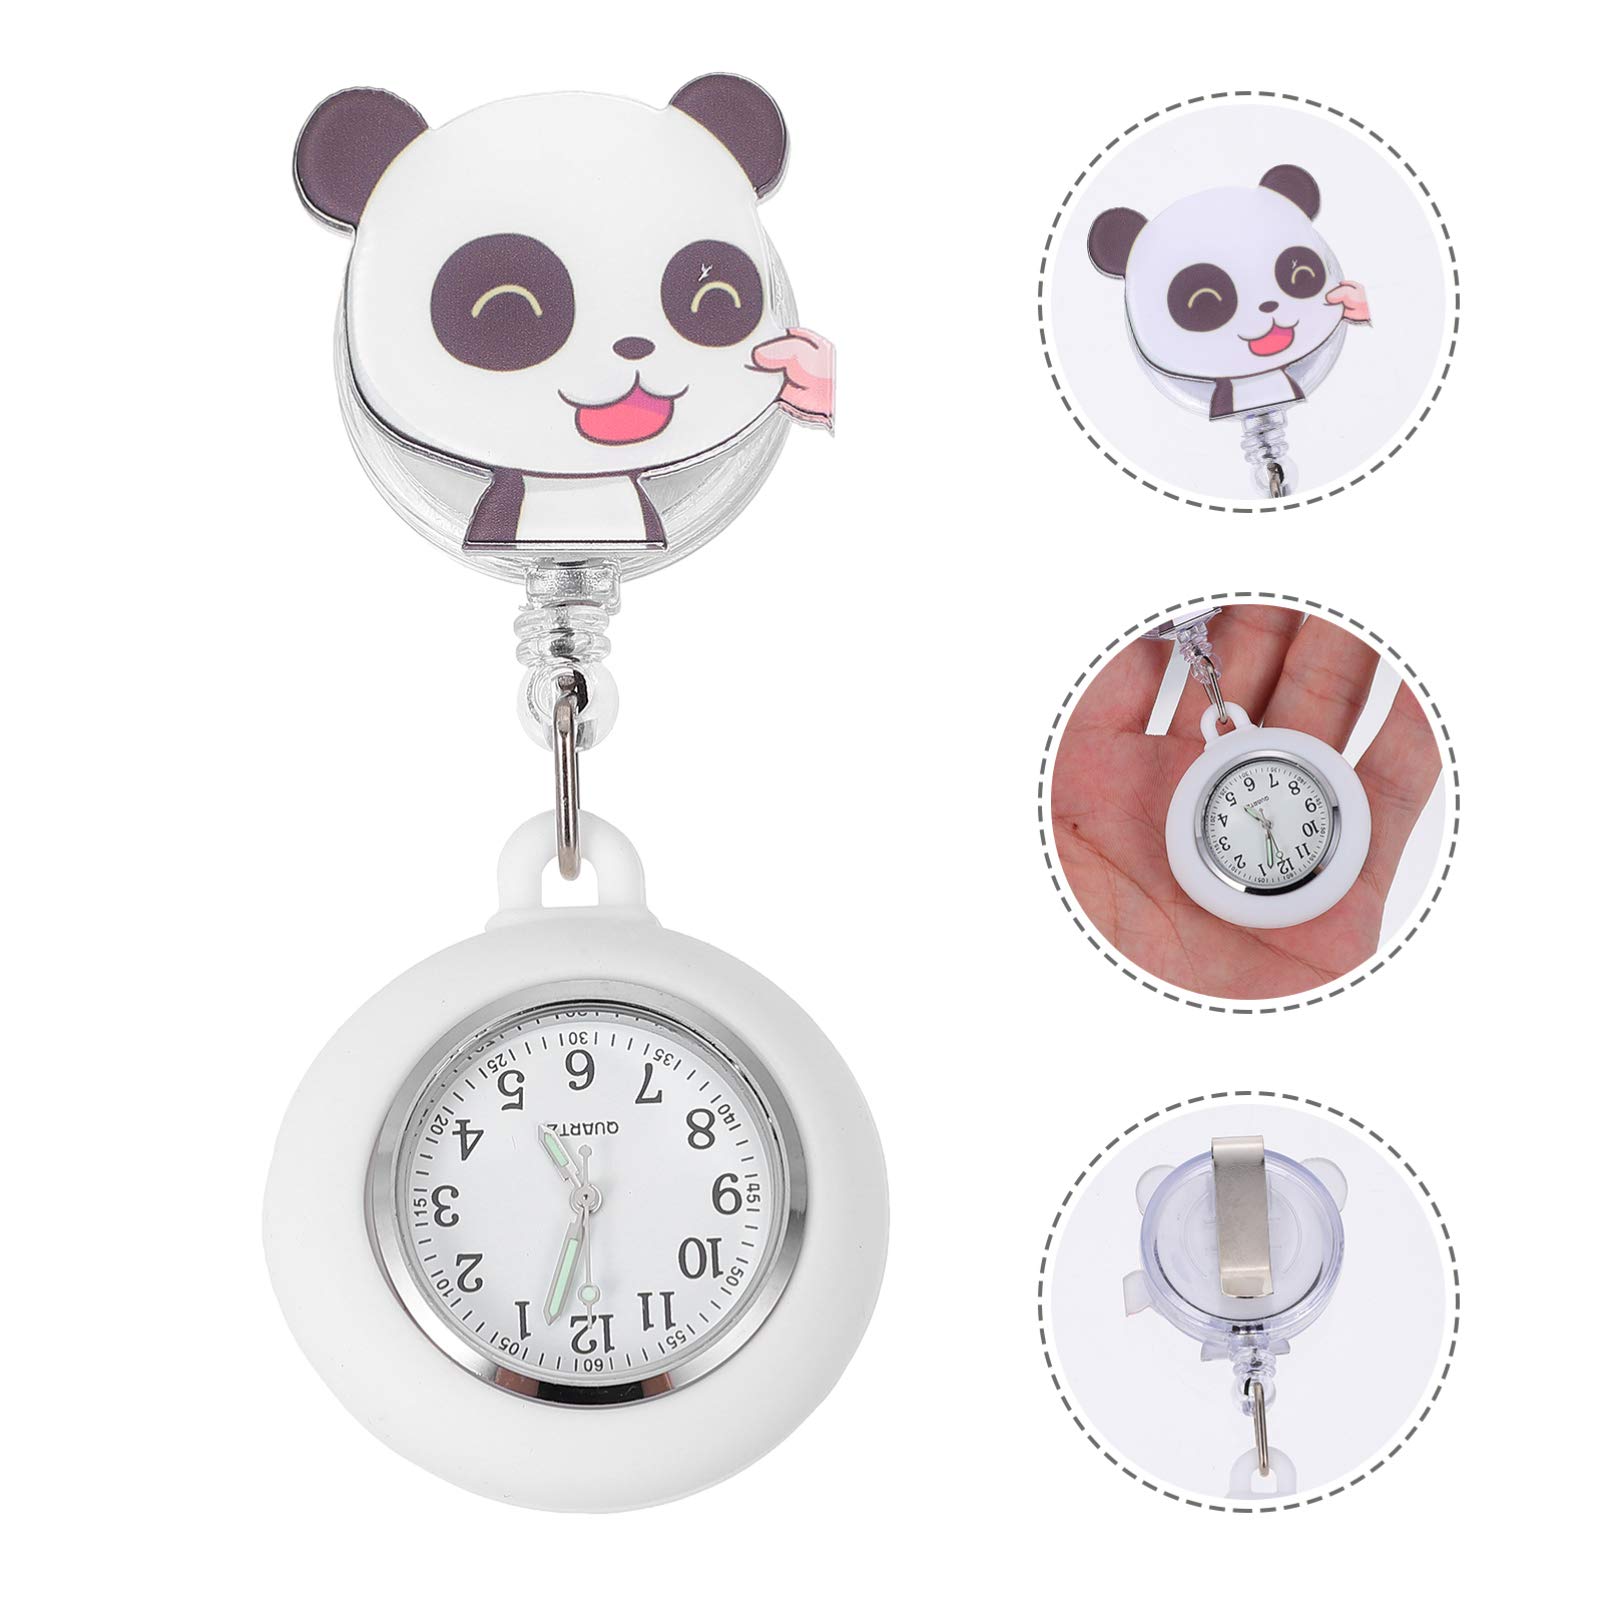 Hemobllo Cute Nurse Watch Alloy Metal Cartoon Panda Watch Portable Clip On Watch with Second Hand Stethoscope Badge Fob Medical Pocket Watch Gifts for Doctor Nurse